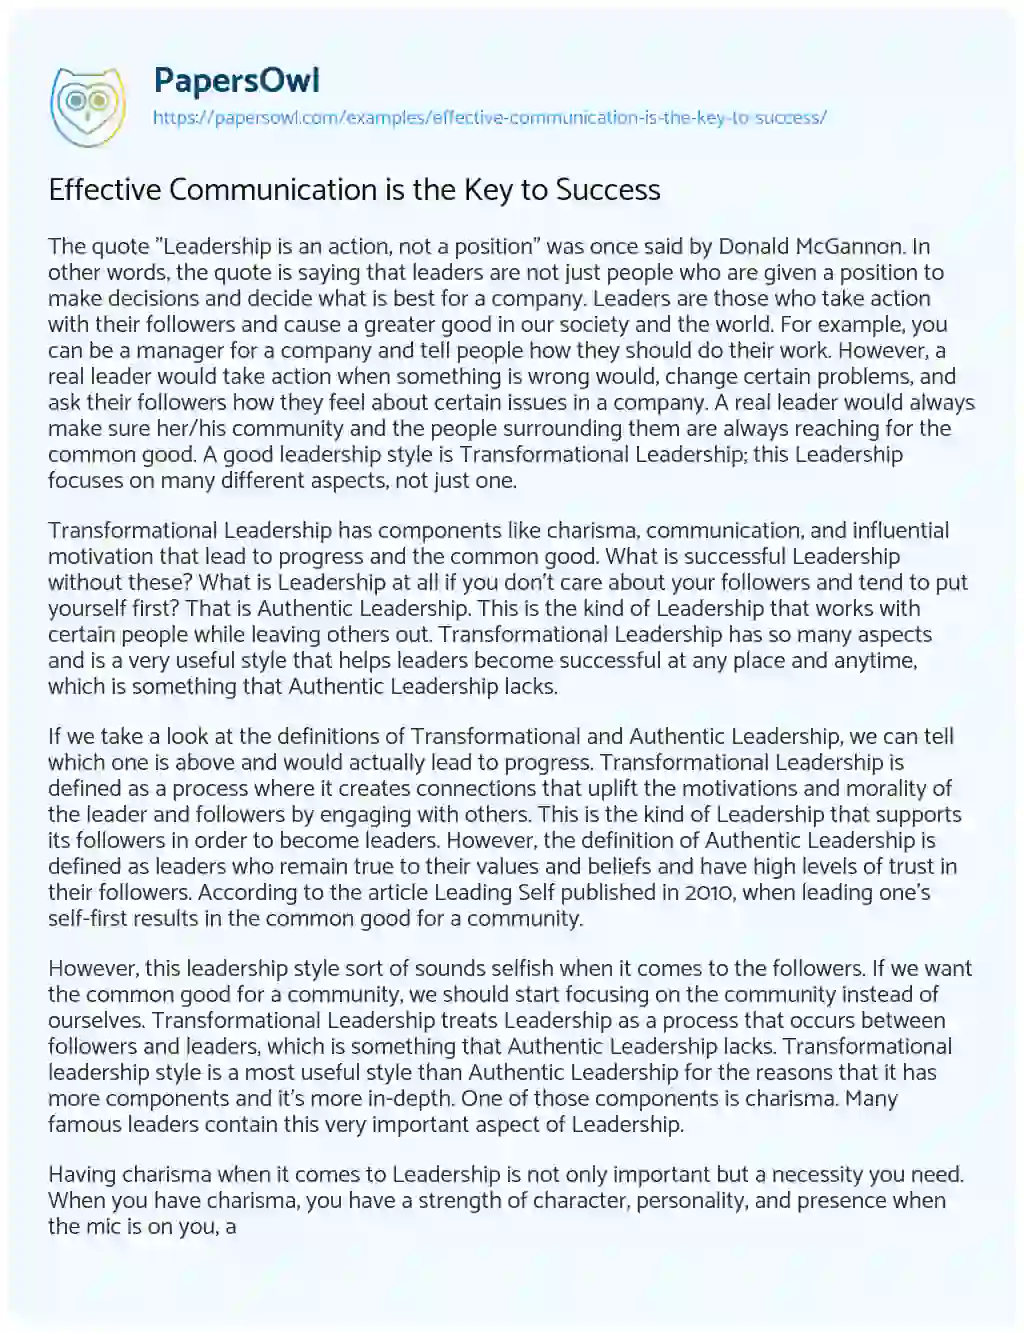 Essay on Effective Communication is the Key to Success